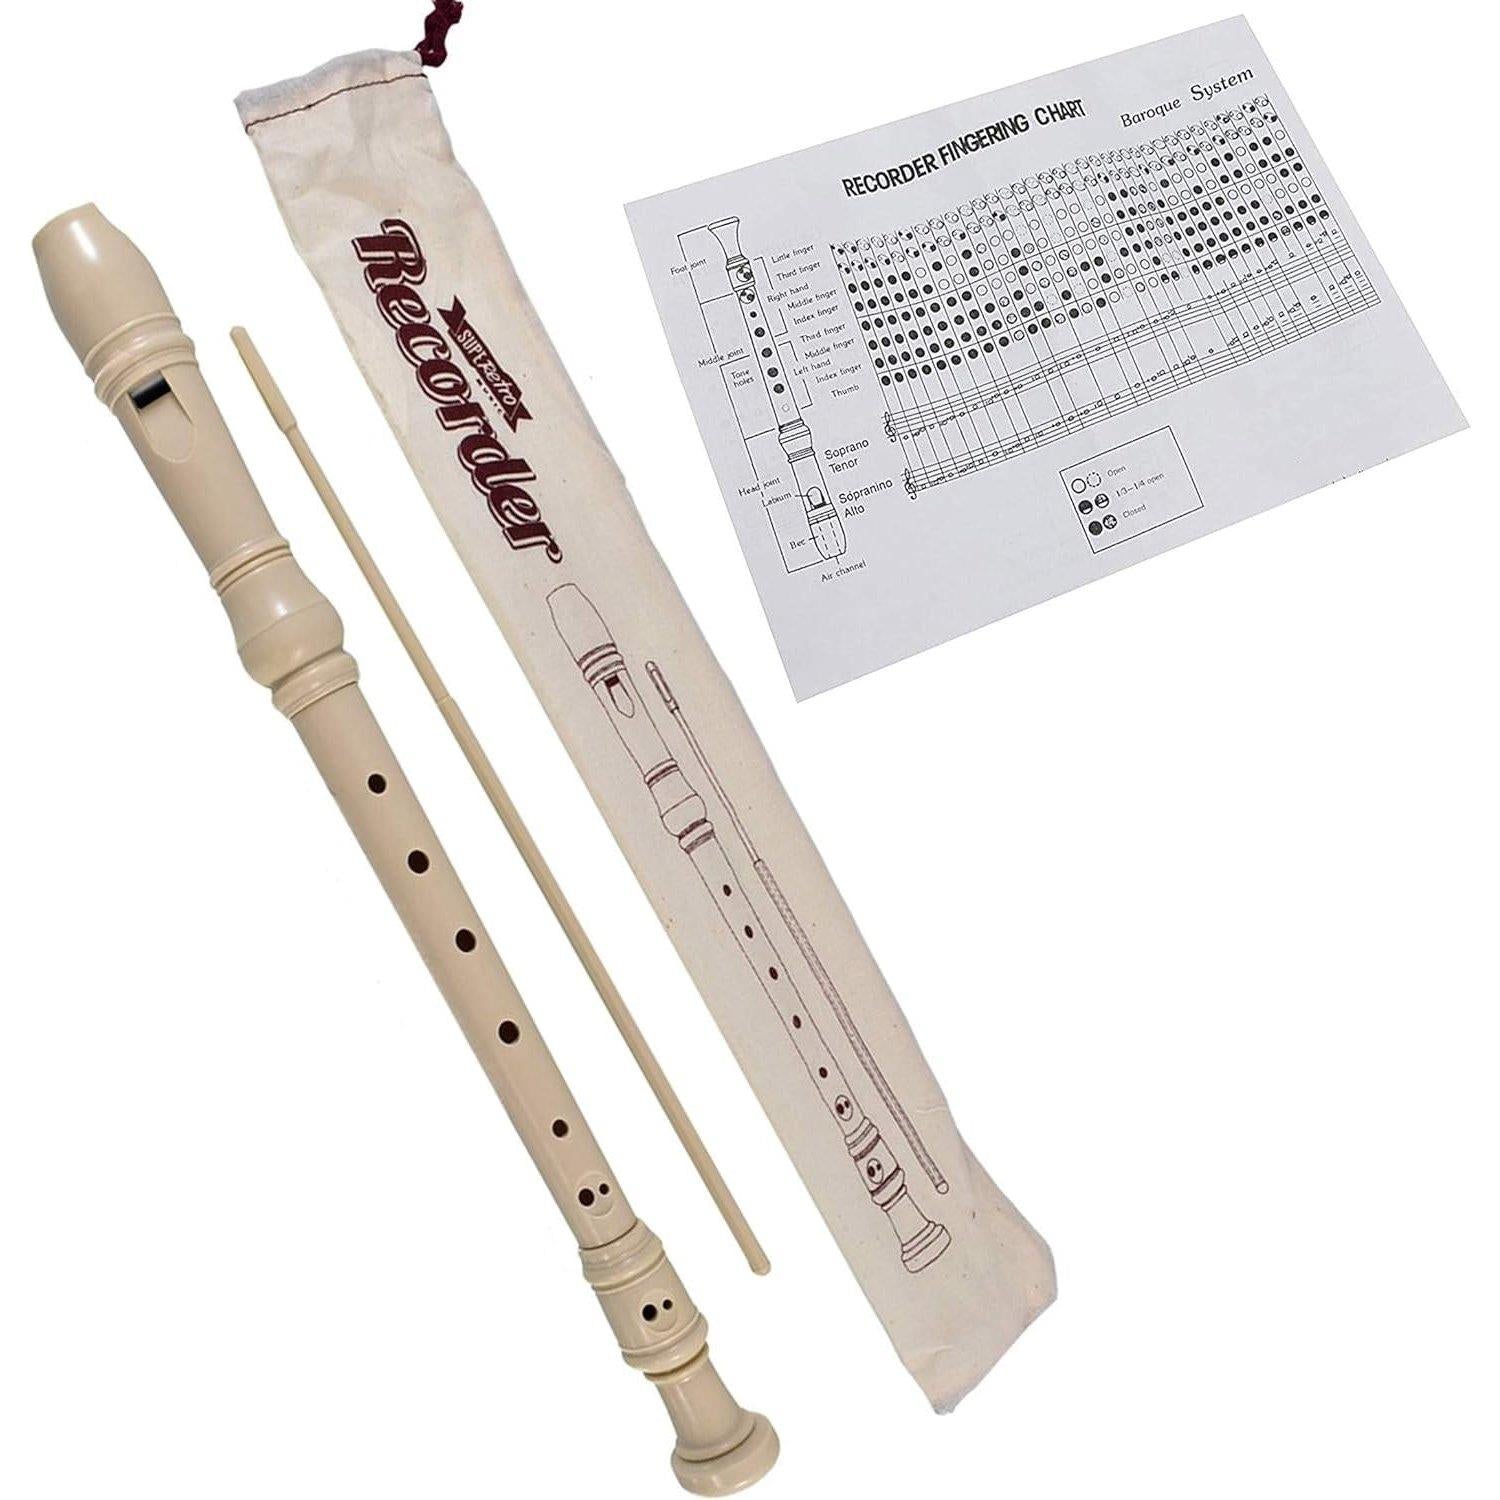 Recorder & Cleaning Rod with Storage Bag and Instructions by The Magic Toy Shop - UKBuyZone